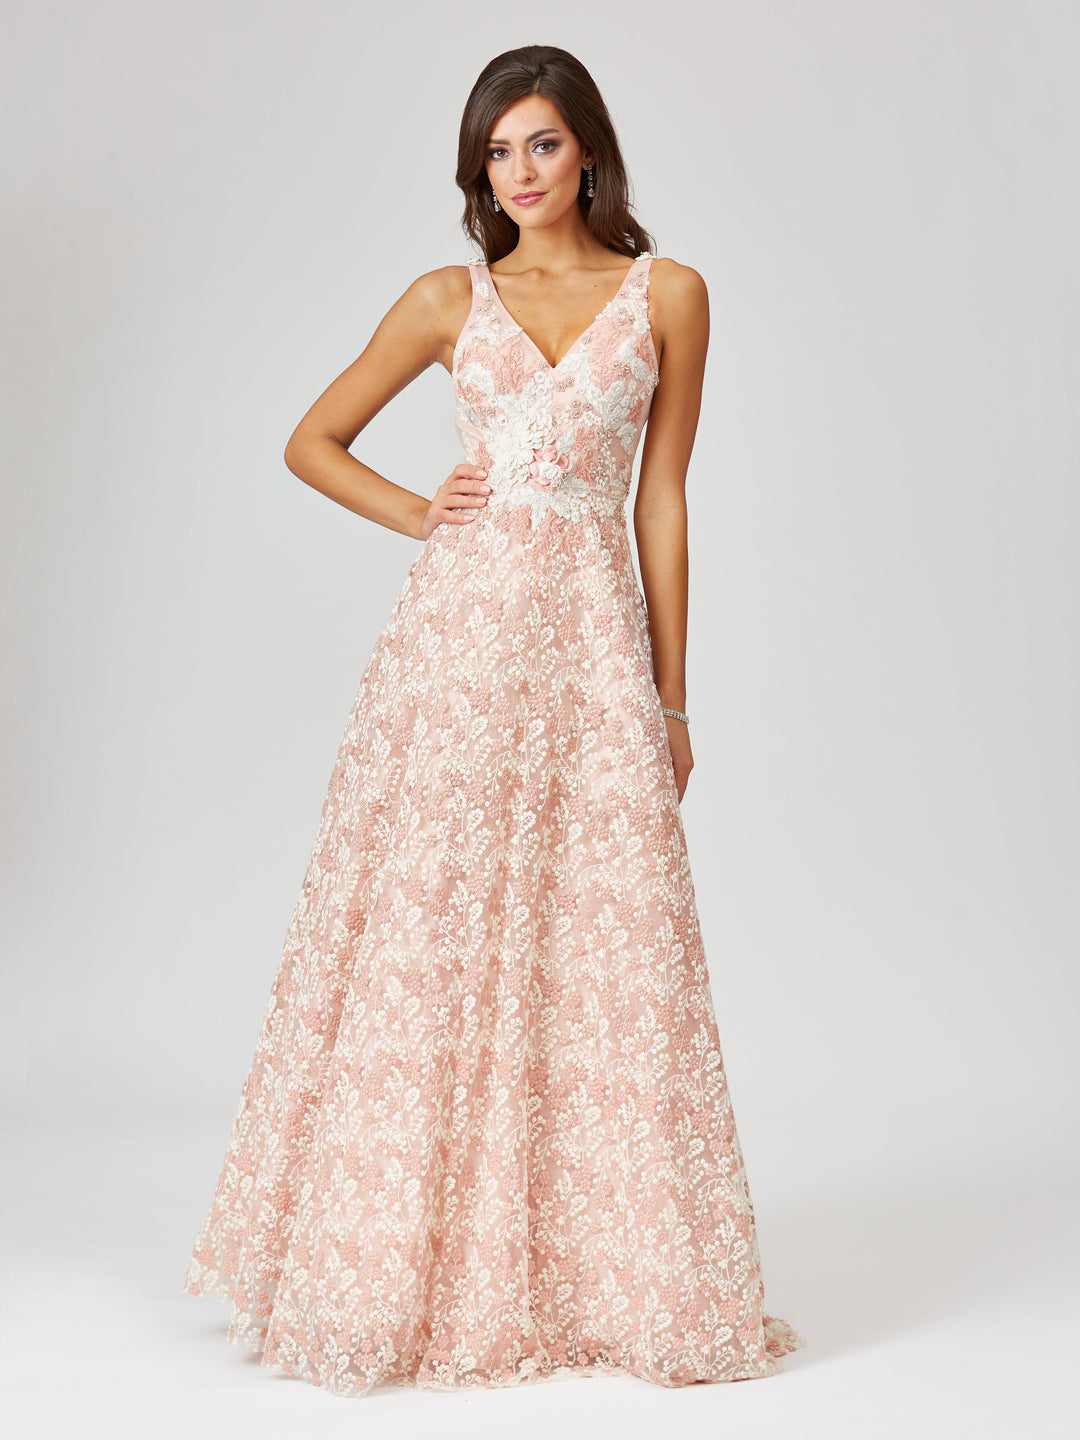 Lara 29463 - Lace Ballgown with Floral Appliques - FOSTANI